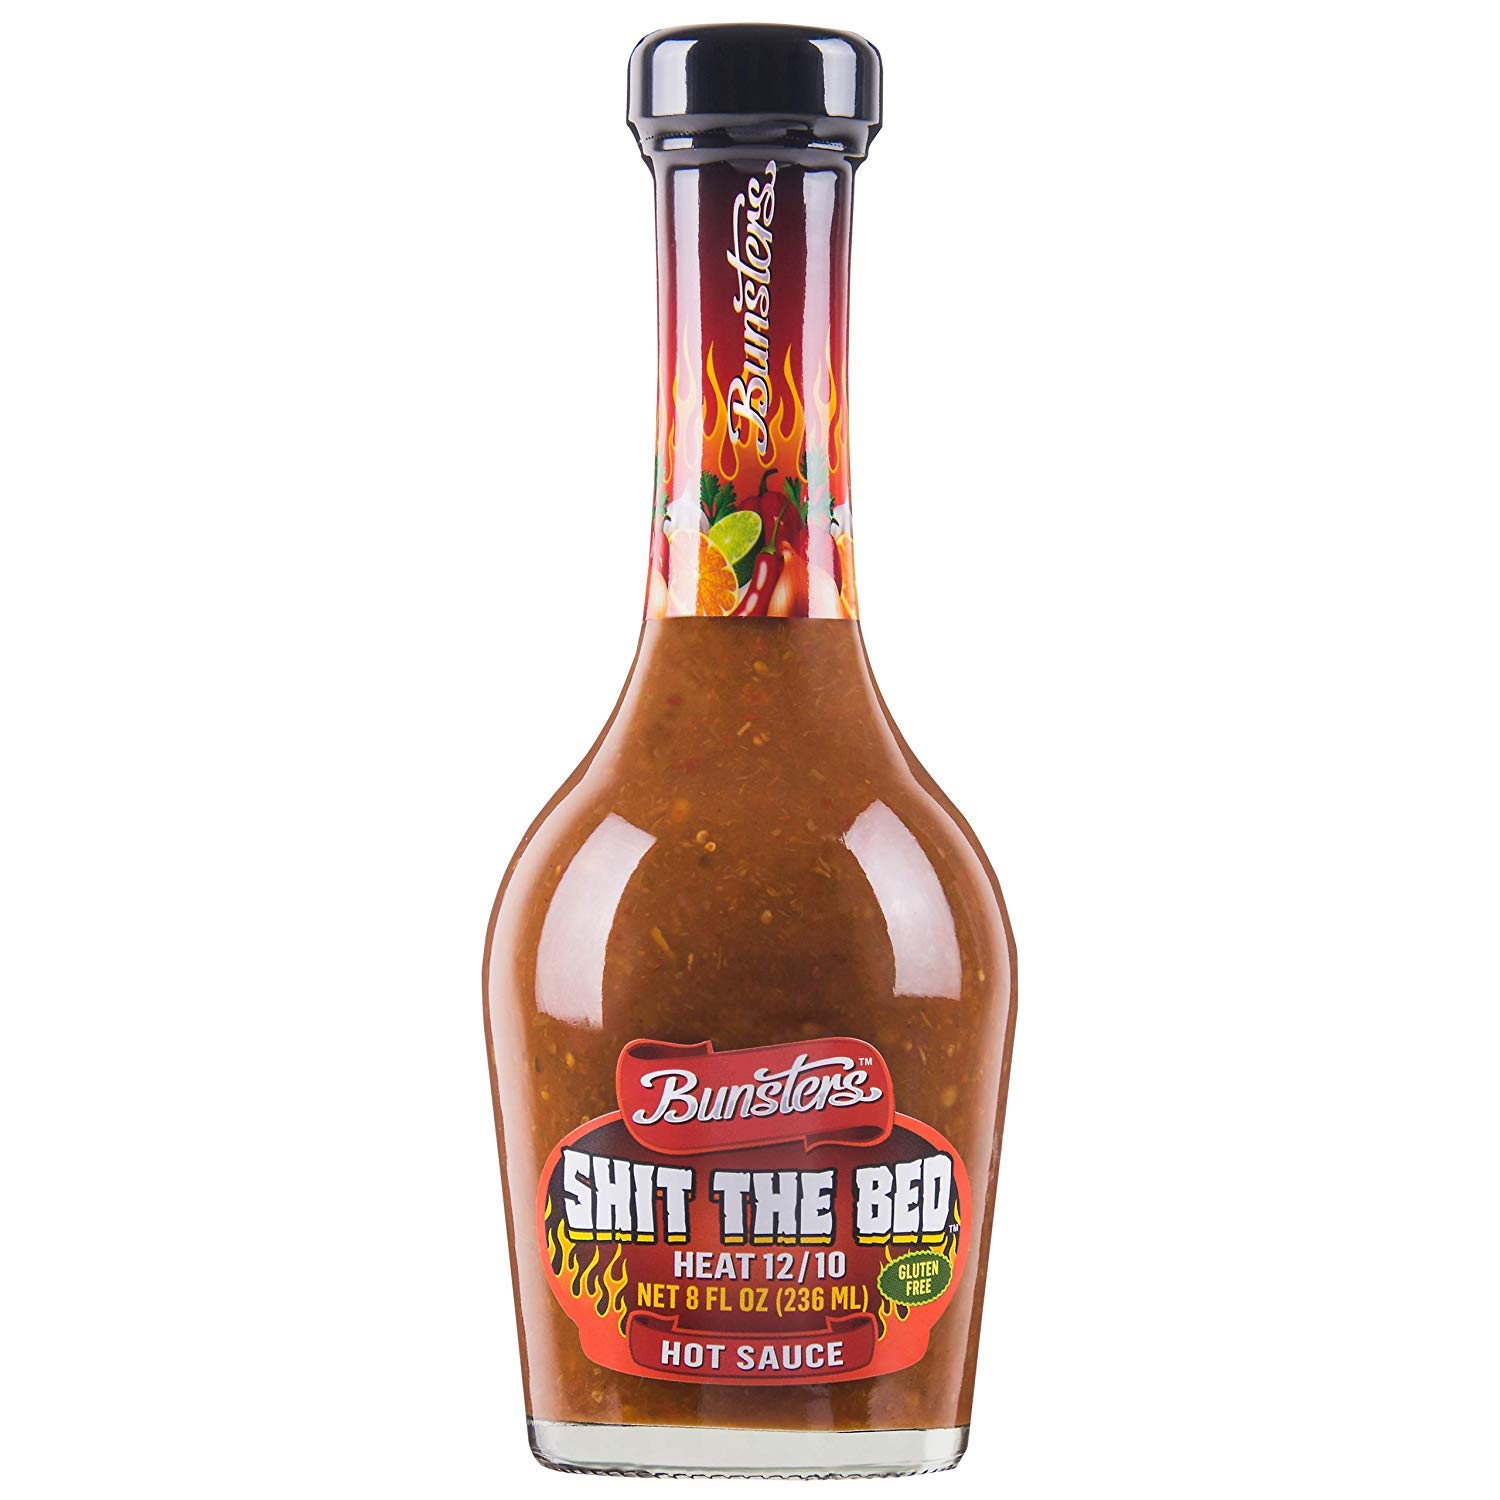 Bunsters Shit The Bed 12/10 Heat Hot Sauce - Chili Pepper Sauce (Single Bottle)